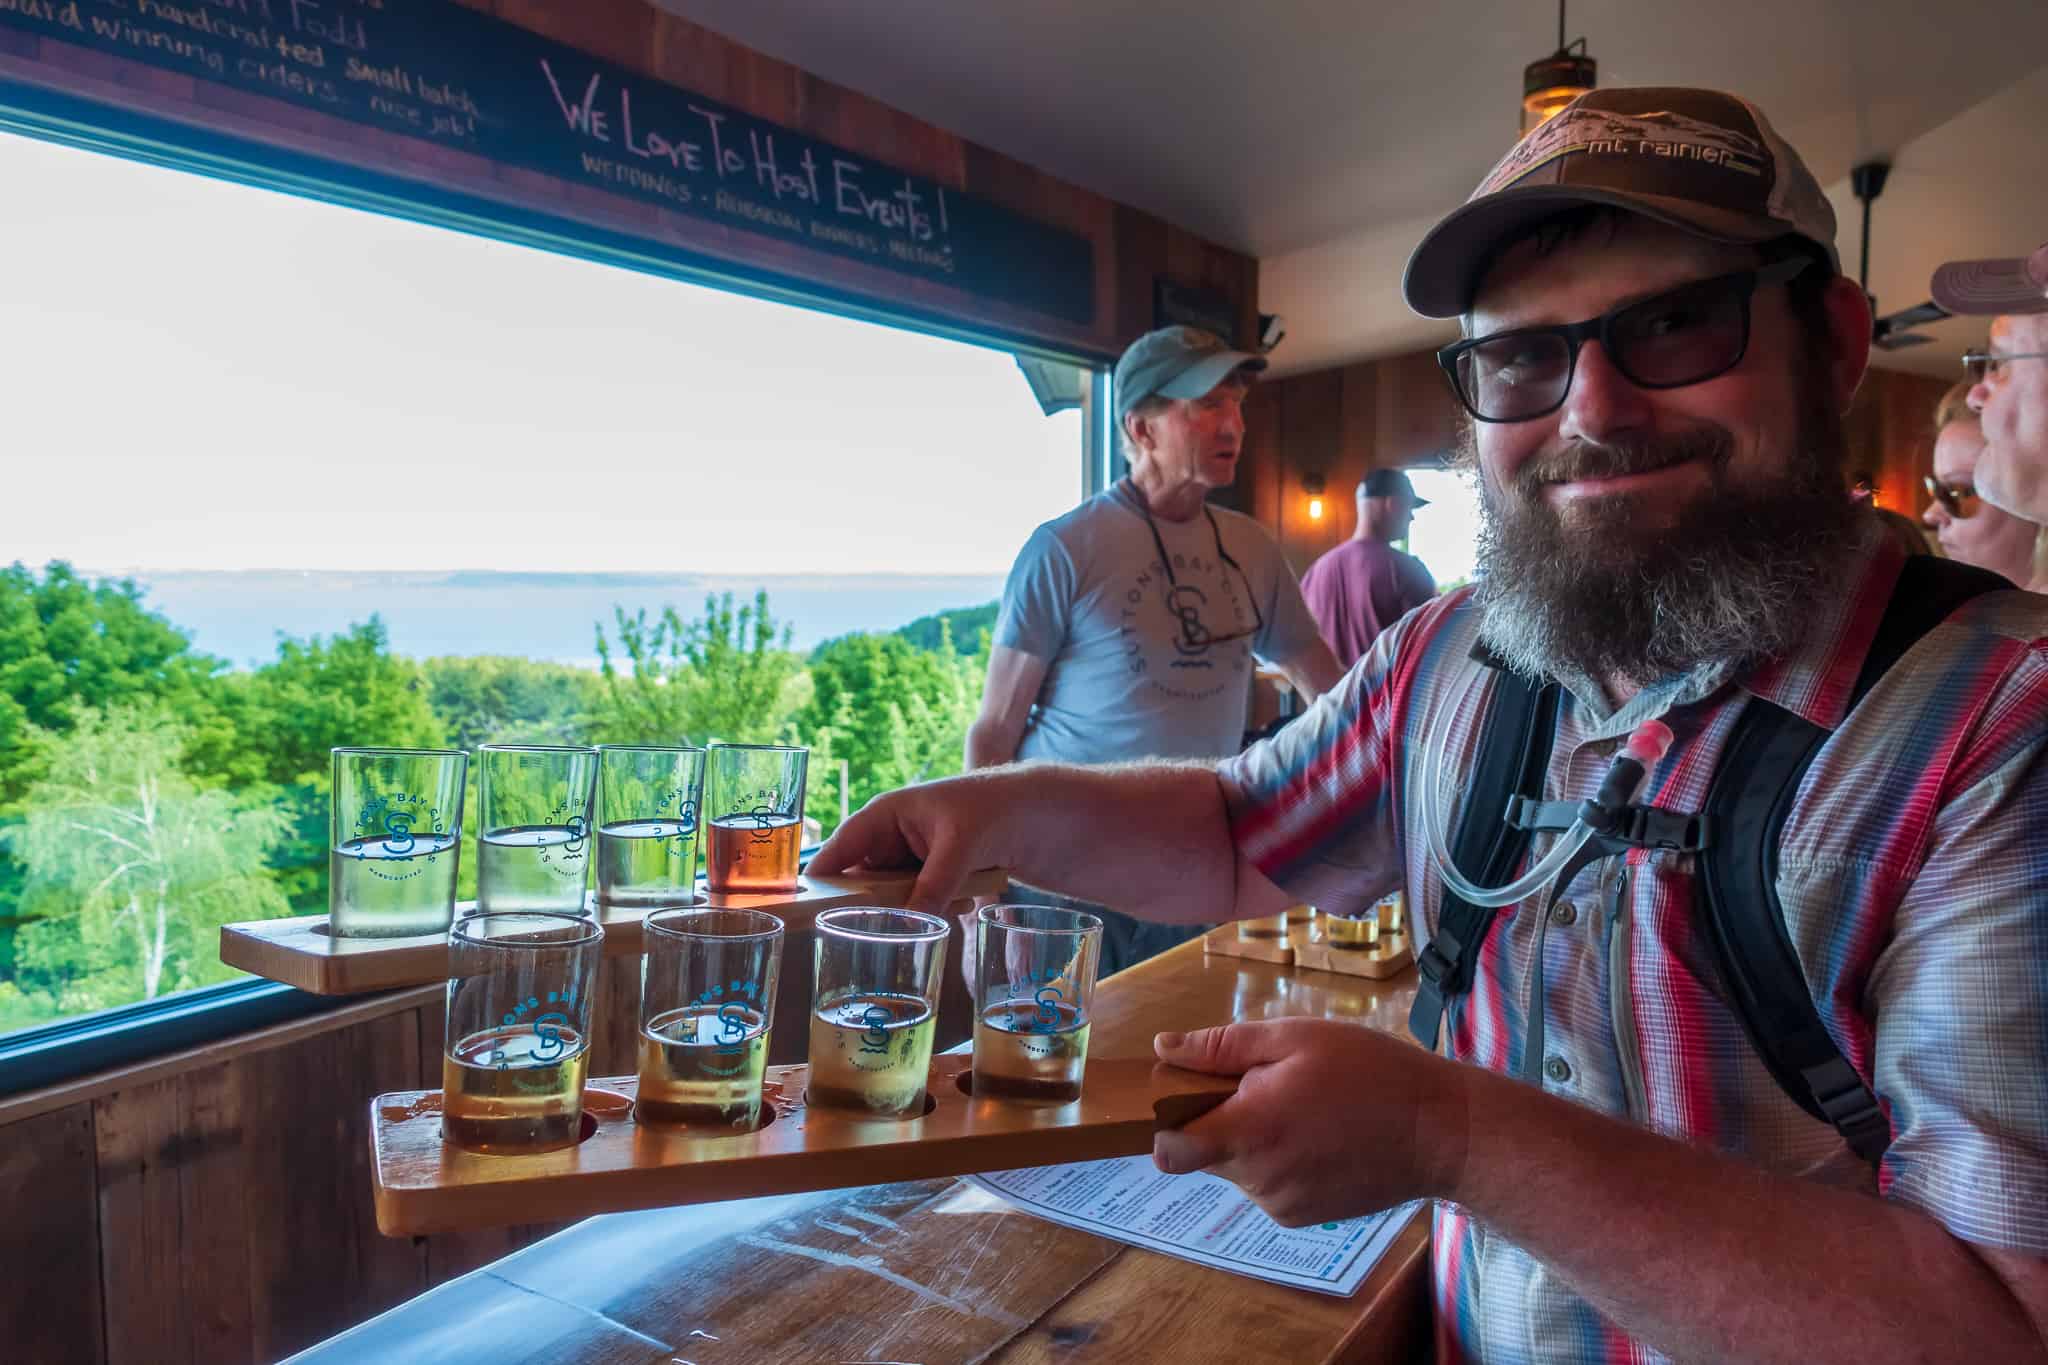 Barrett holding a cider flight at Suttons Bay Ciders on the Traverse City area DIY bike-n-ride tour